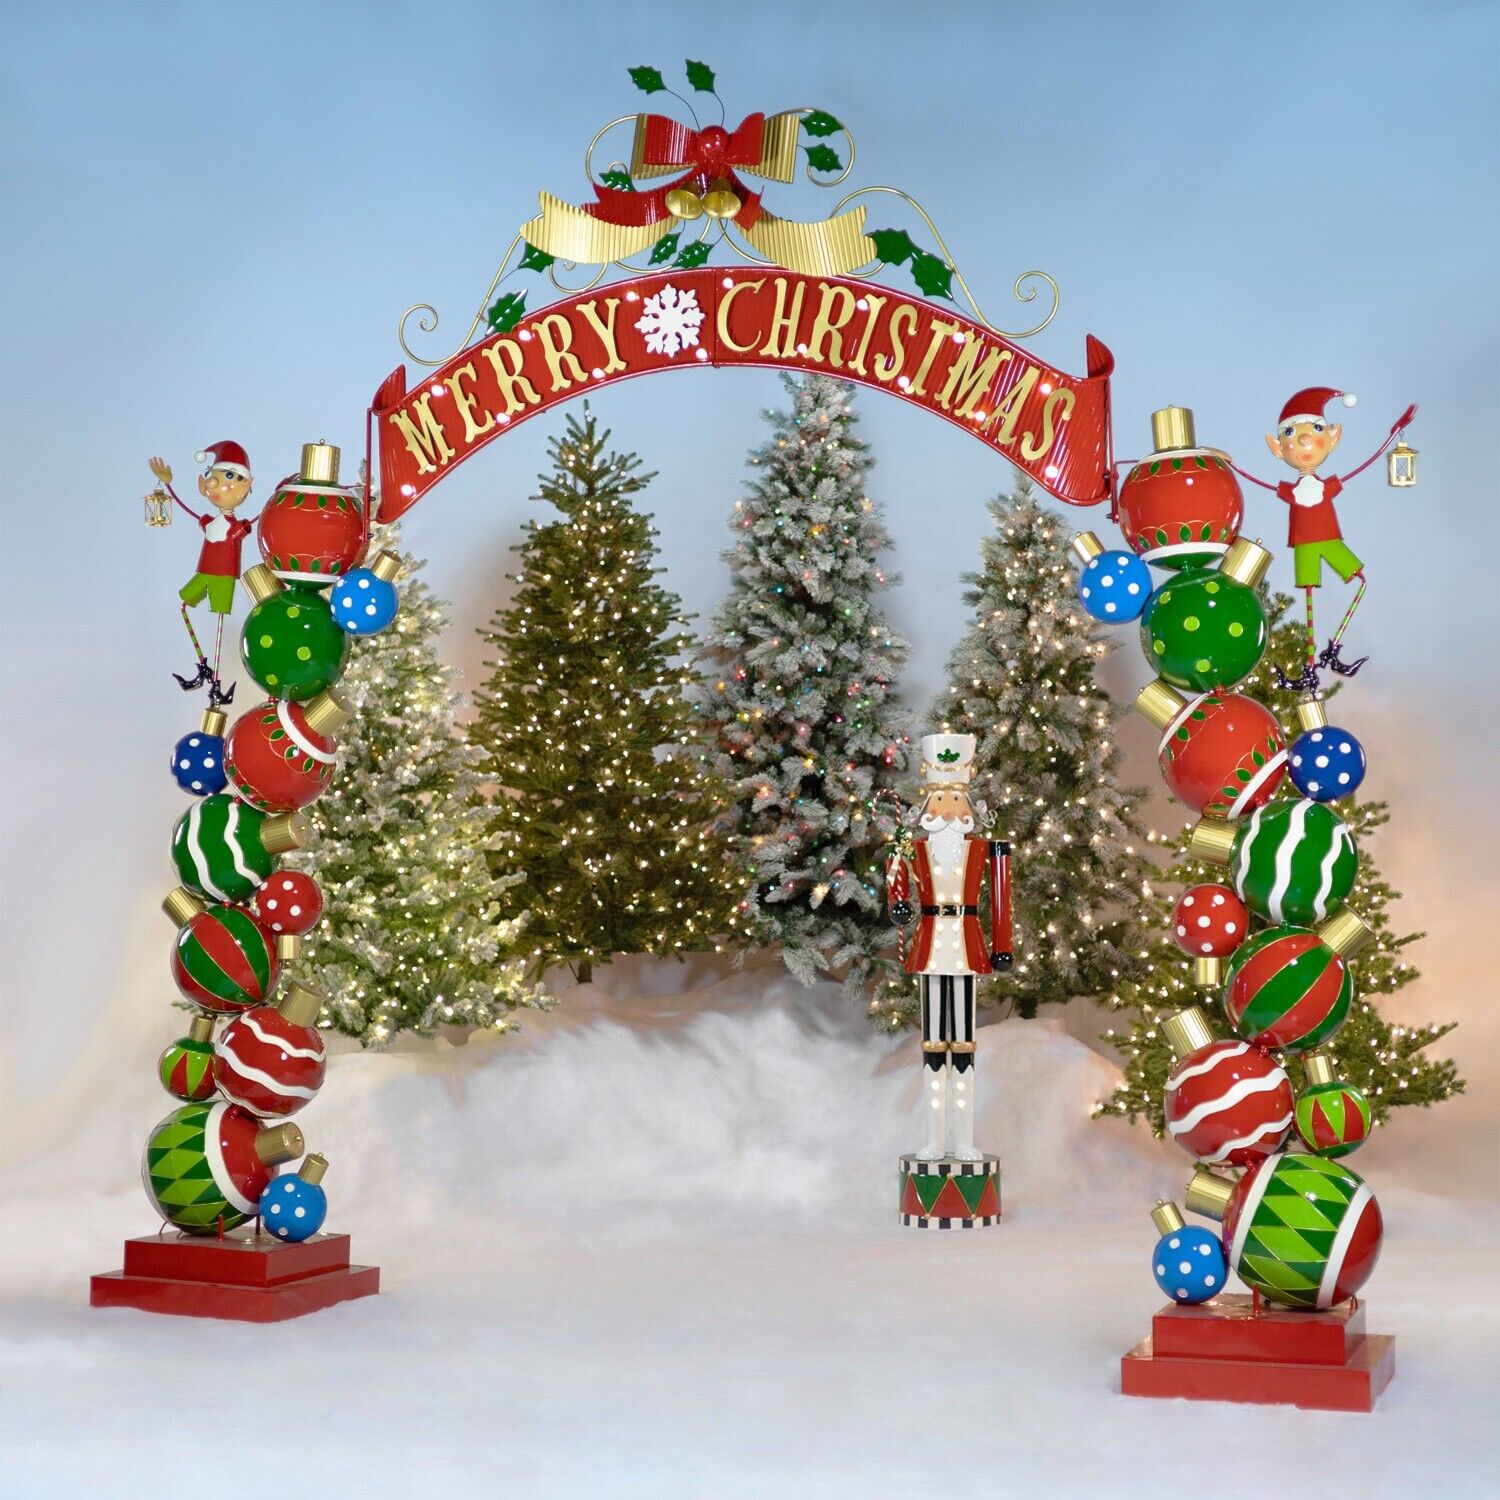 10.75 FT Tall Large Iron Christmas Archway with Elves and Merry Christmas Sign